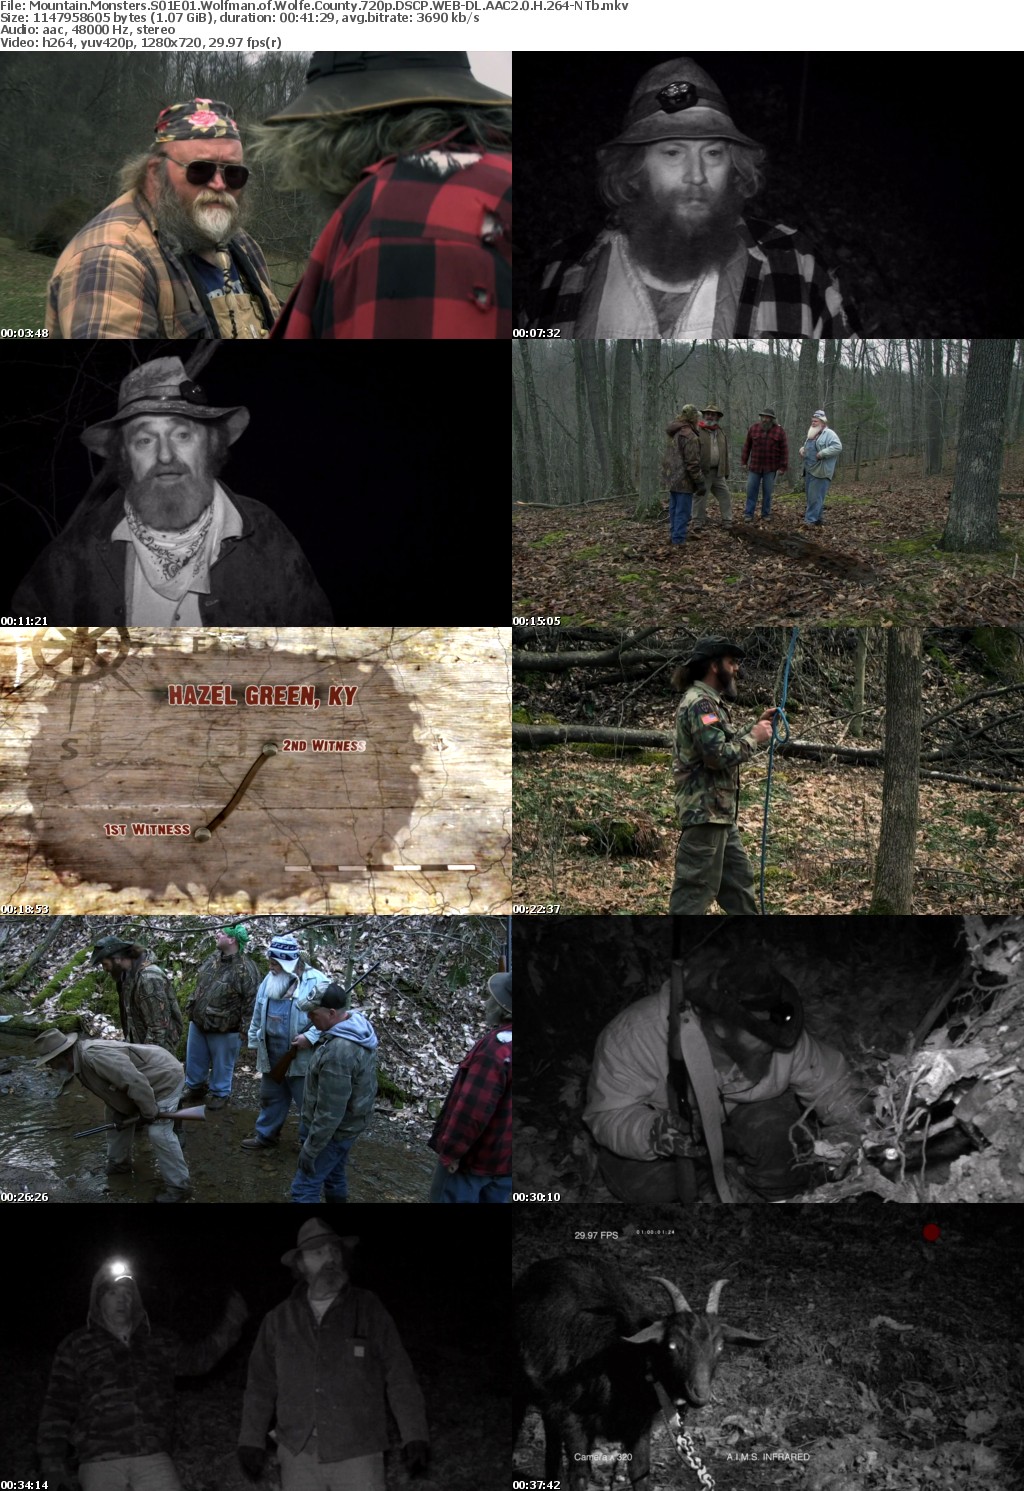 Mountain Monsters S01E01 Wolfman of Wolfe County 720p DSCP WEB-DL AAC2 0 H 264-NTb